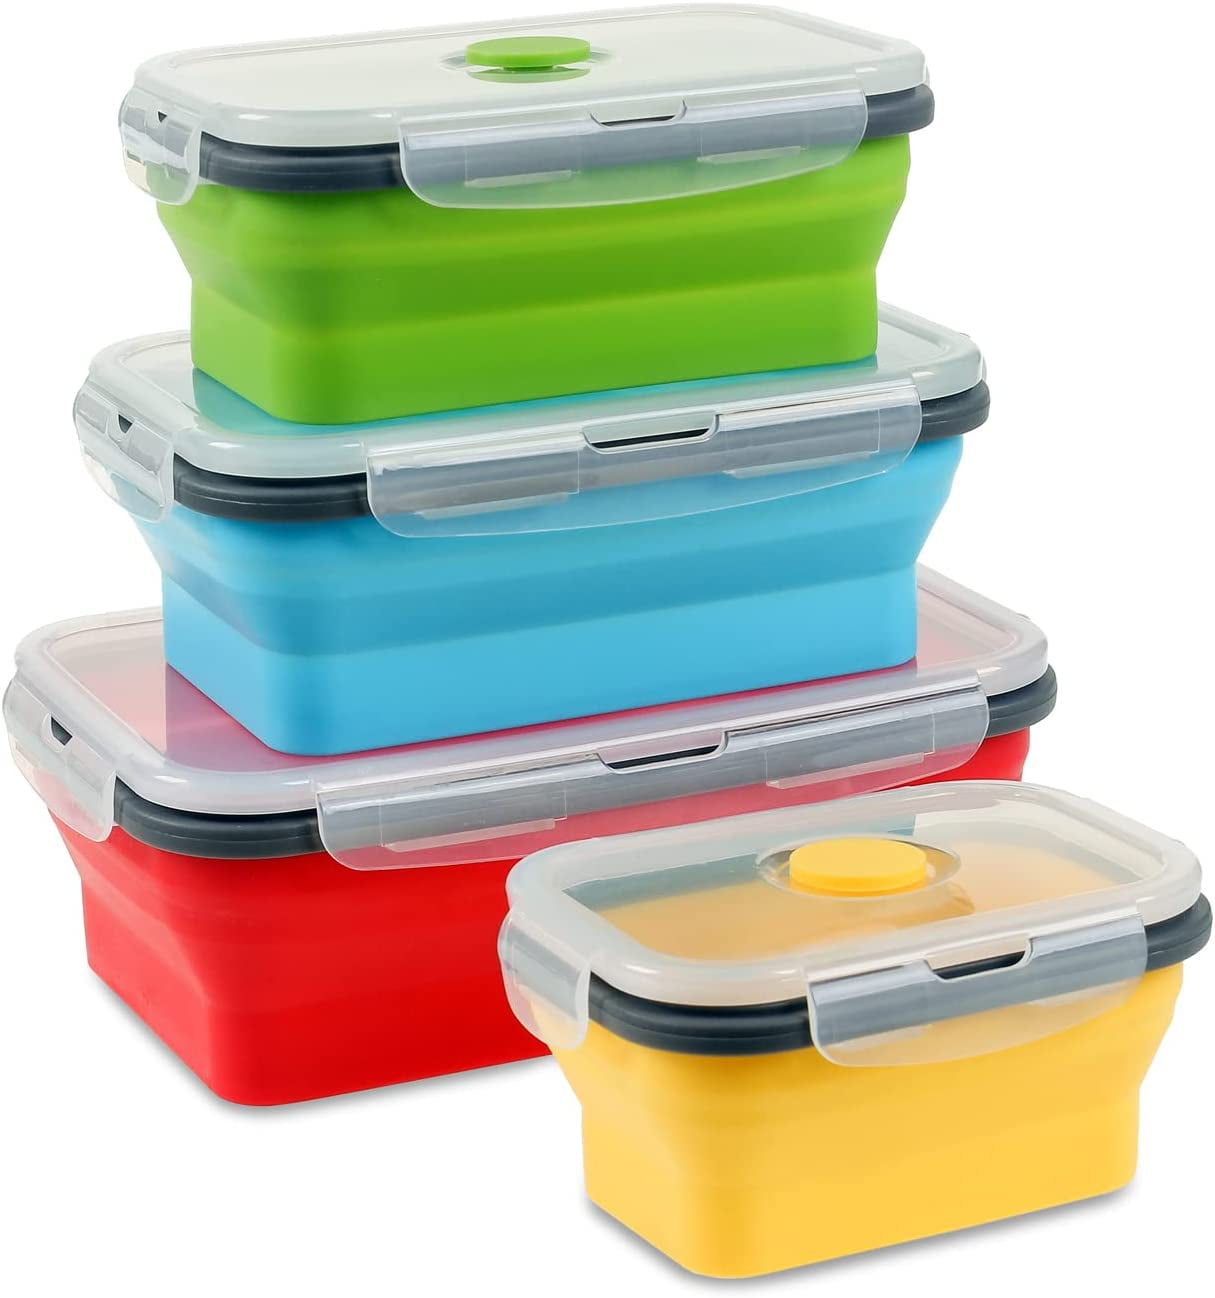 Food52's Airtight Silicone Lids Are Perfect for Storing Pots